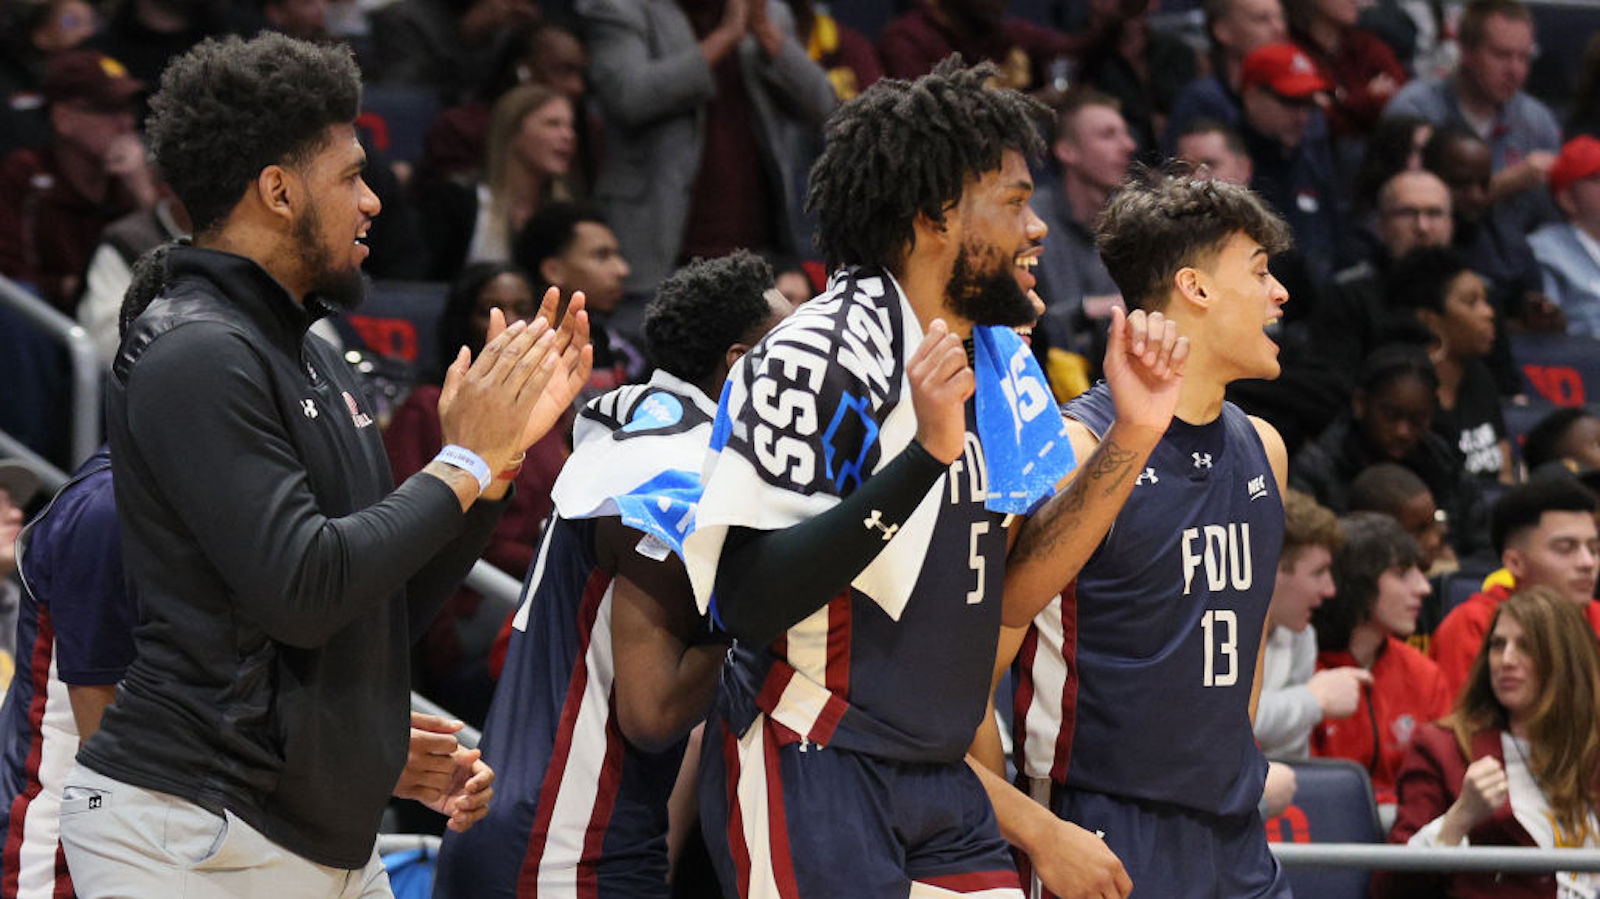 DAYTON, OHIO - MARCH 15: Ansley Almonor #5 and Jo'el Emanuel #13 of the Fairleigh Dickinson Knights celebrate after defeating the Texas Southern Tigers in the First Four game of the NCAA Men's Basketball Tournament at University of Dayton Arena on March 15, 2023 in Dayton, Ohio.